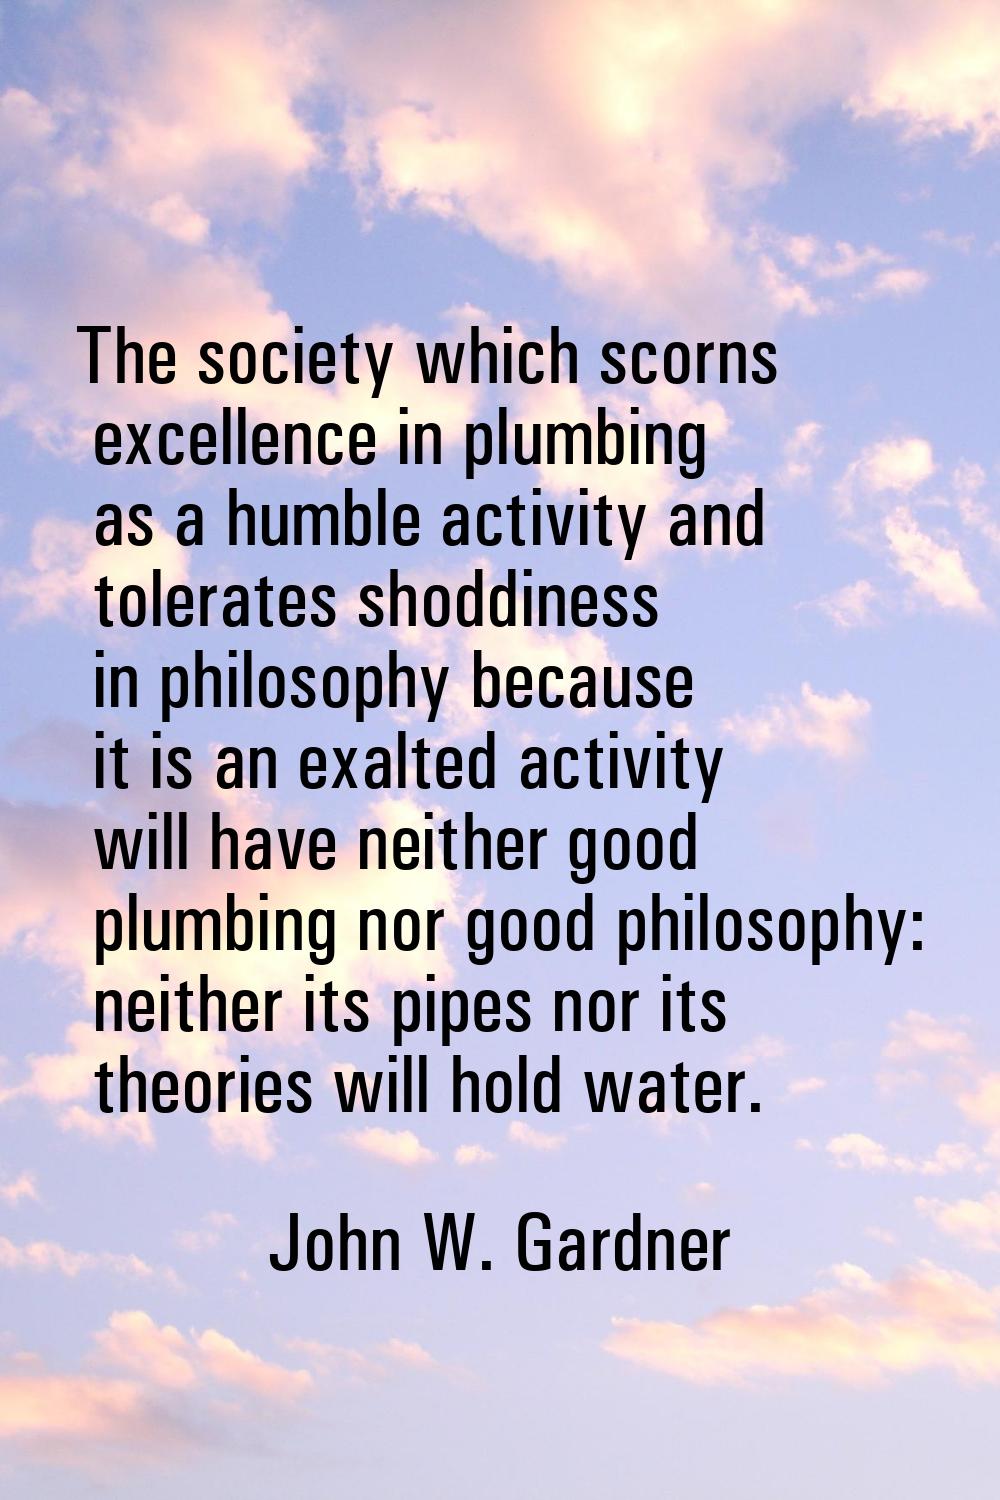 The society which scorns excellence in plumbing as a humble activity and tolerates shoddiness in ph